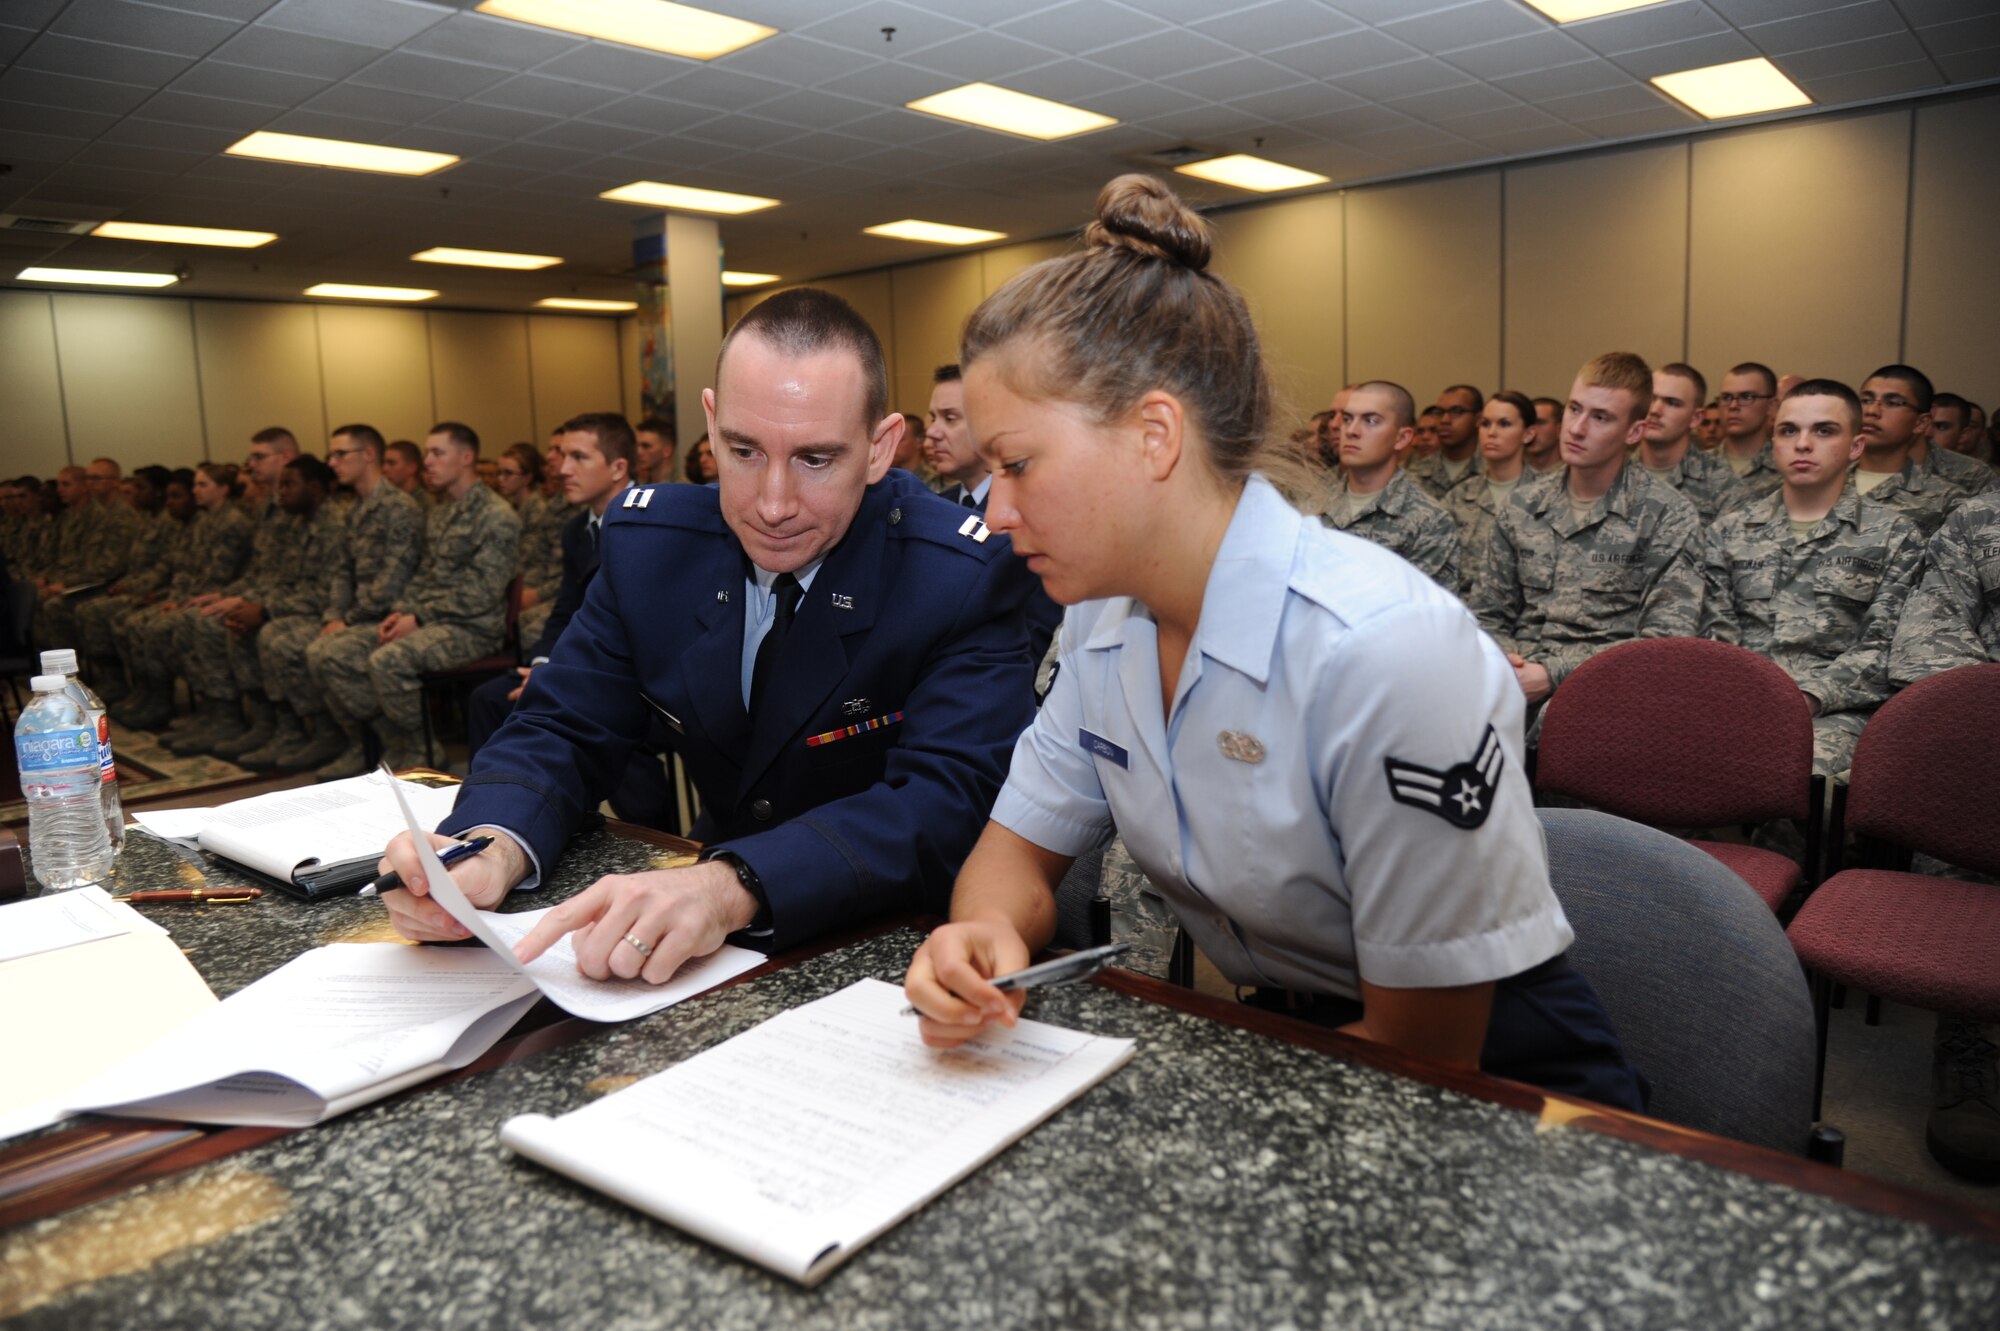 Capt. Craig Dunham, 81st Training Wing assistant staff judge advocate and trial prosecutor, and Airman 1st Class Alayna Carboni, 81st TRW paralegal, review documents during a summary court martial Feb. 8, 2013, at the Levitow Training Support Facility, Keesler Air Force Base, Miss.  Mobile summary courts martial set an example for new Airmen about consequences of their actions by quickly imposing good order and discipline.  (U.S. Air Force photo by Kemberly Groue)